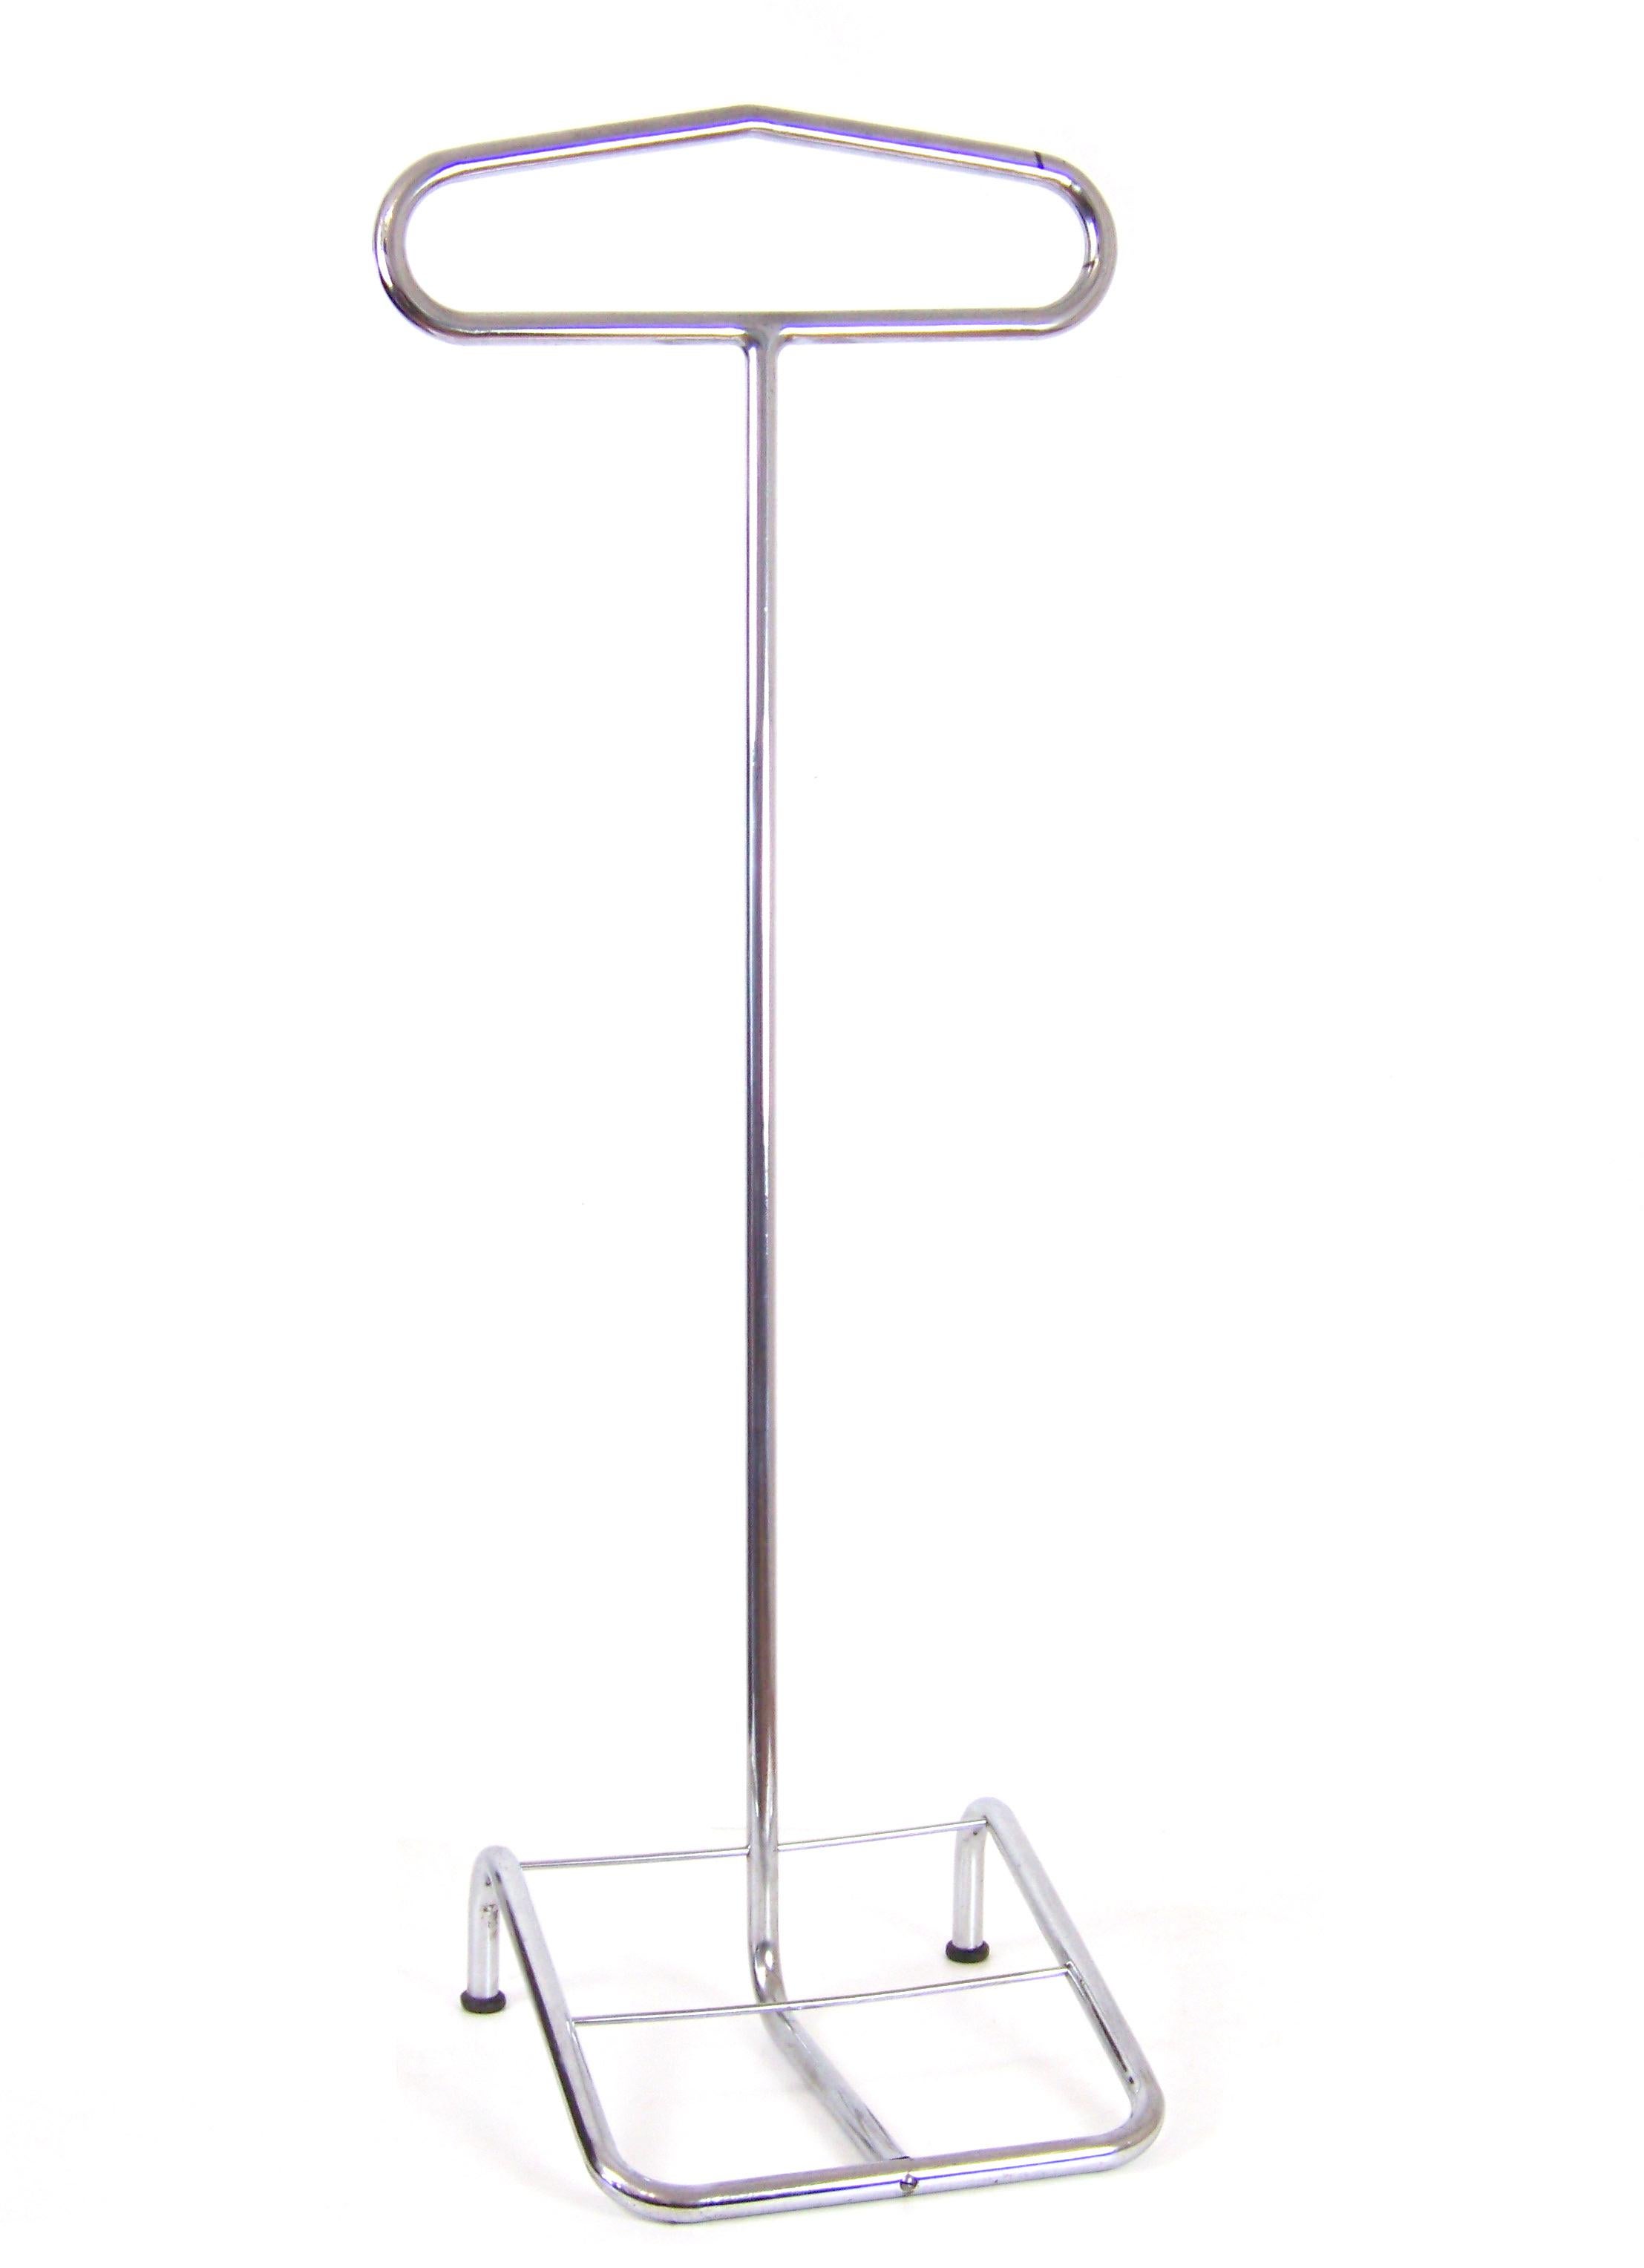 20th Century Chromed Clothes Valet Stand, Dressboy by Vichr, circa 1930